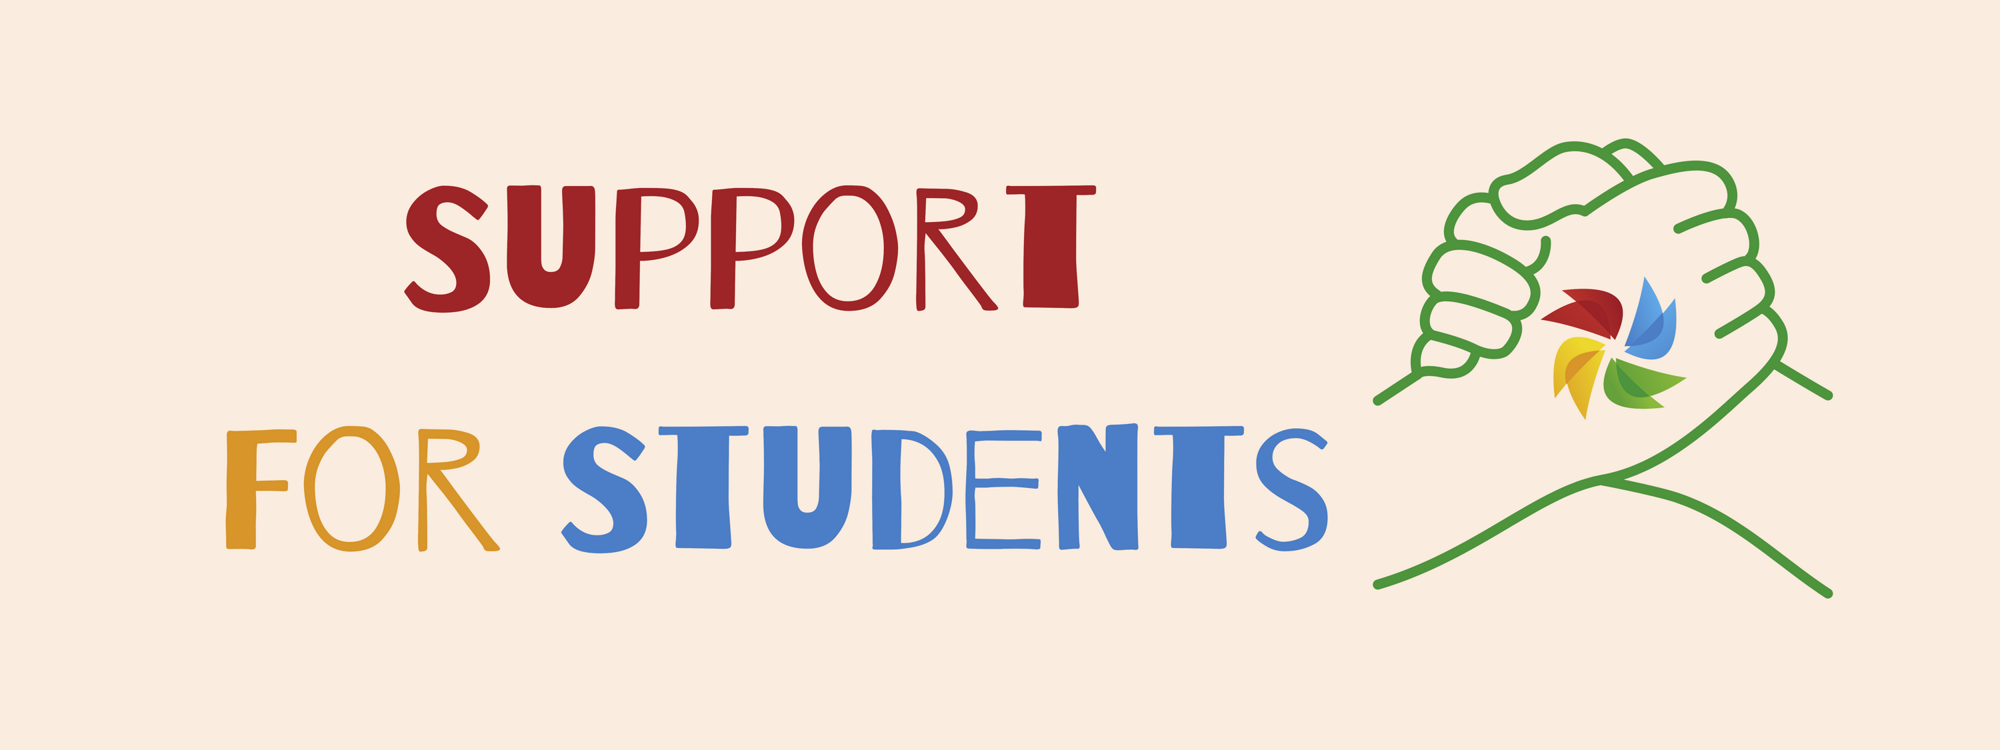 Support for students